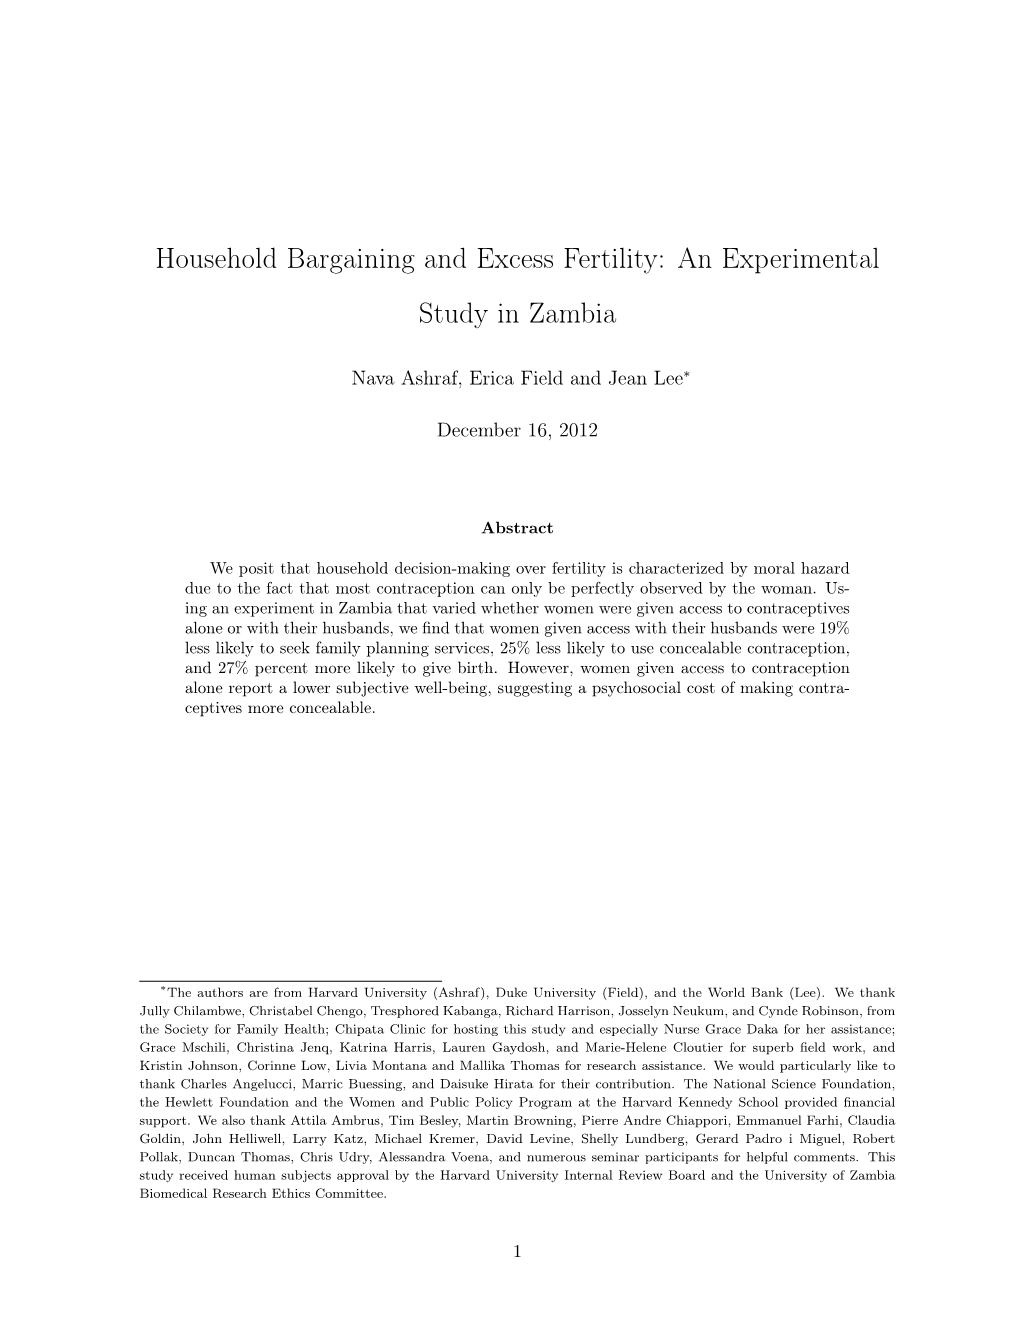 Household Bargaining and Excess Fertility: an Experimental Study in Zambia